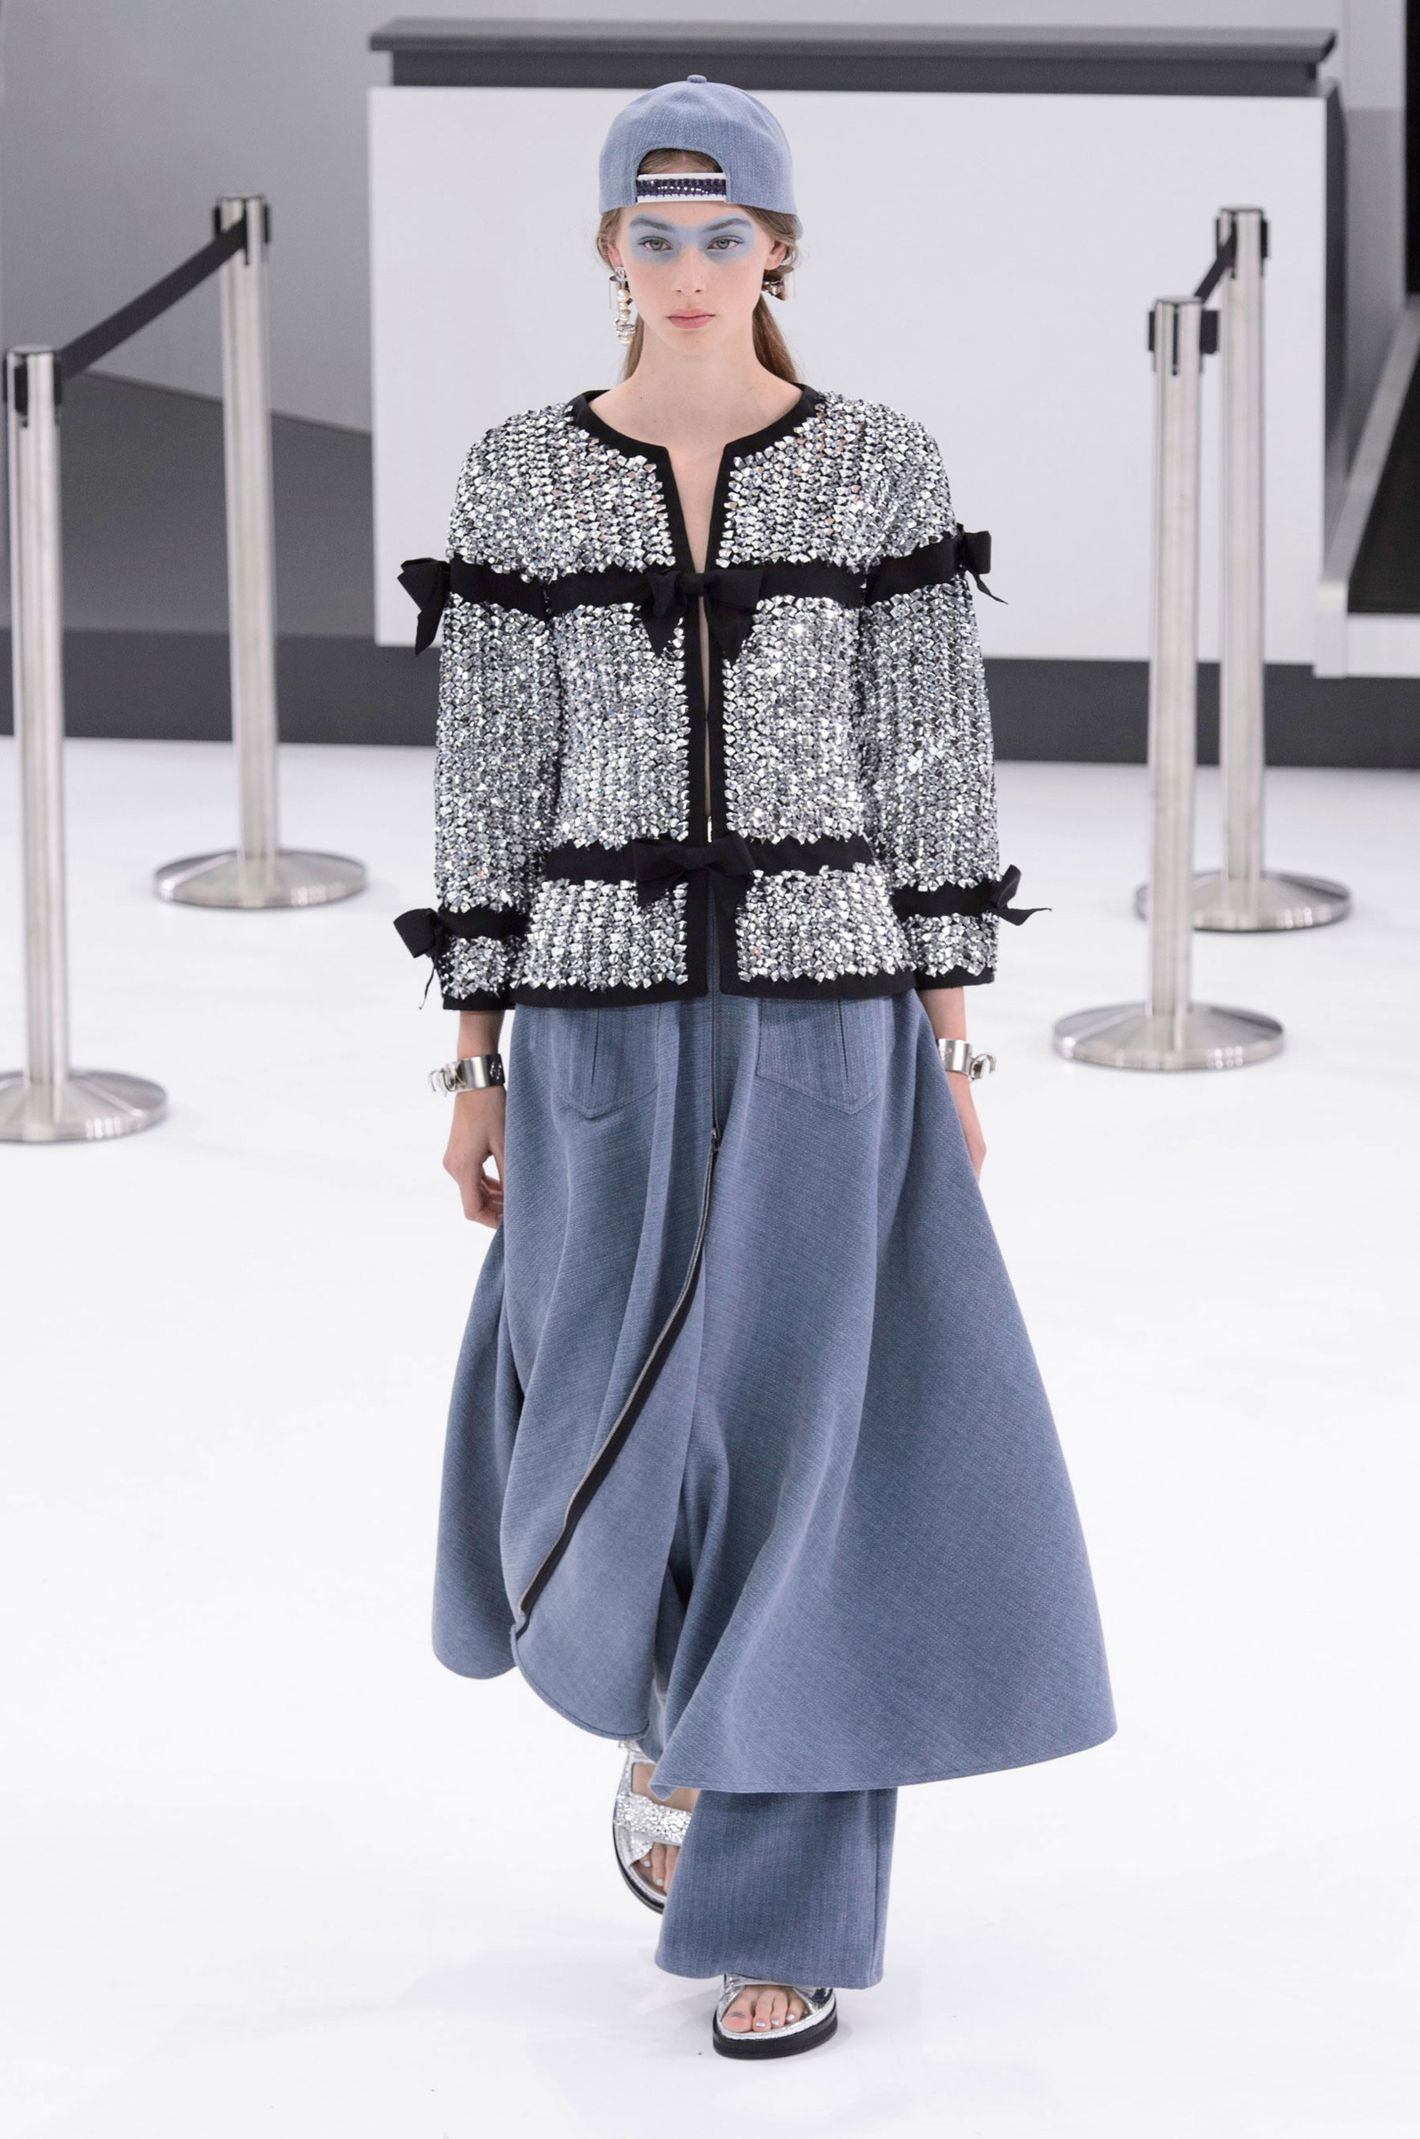 Chanel Ready To Wear Fashion Show, Collection Spring Summer 2016